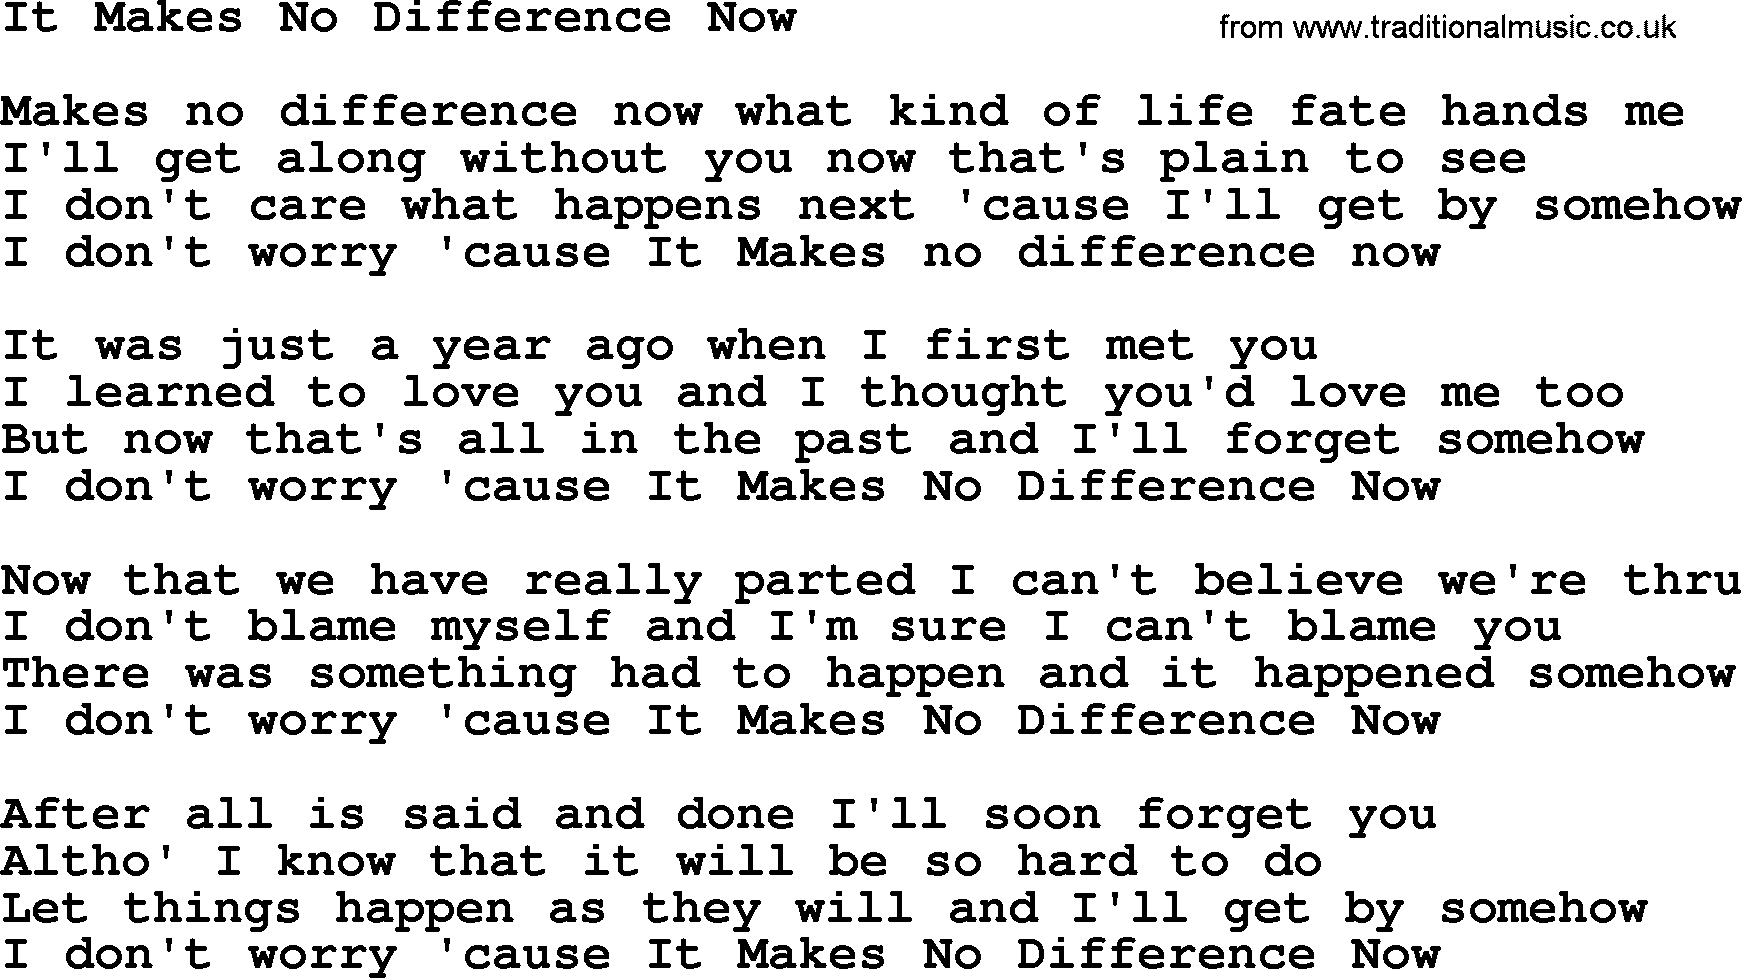 Willie Nelson song: It Makes No Difference Now lyrics